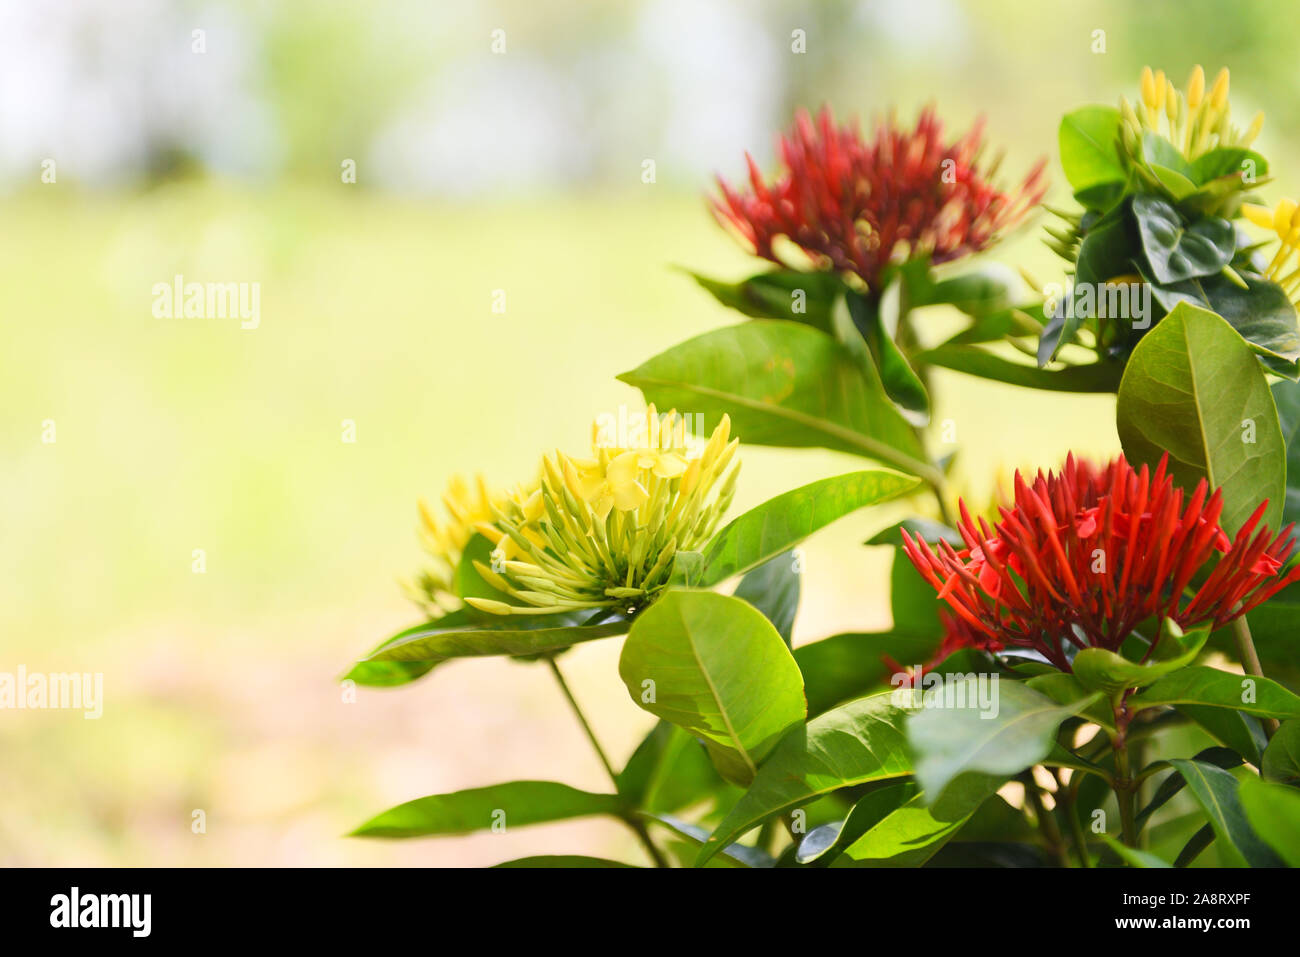 King Ixora yellow and red flower blooming in the garden beautiful nature green background / Chinensis Ixora coccinea Stock Photo